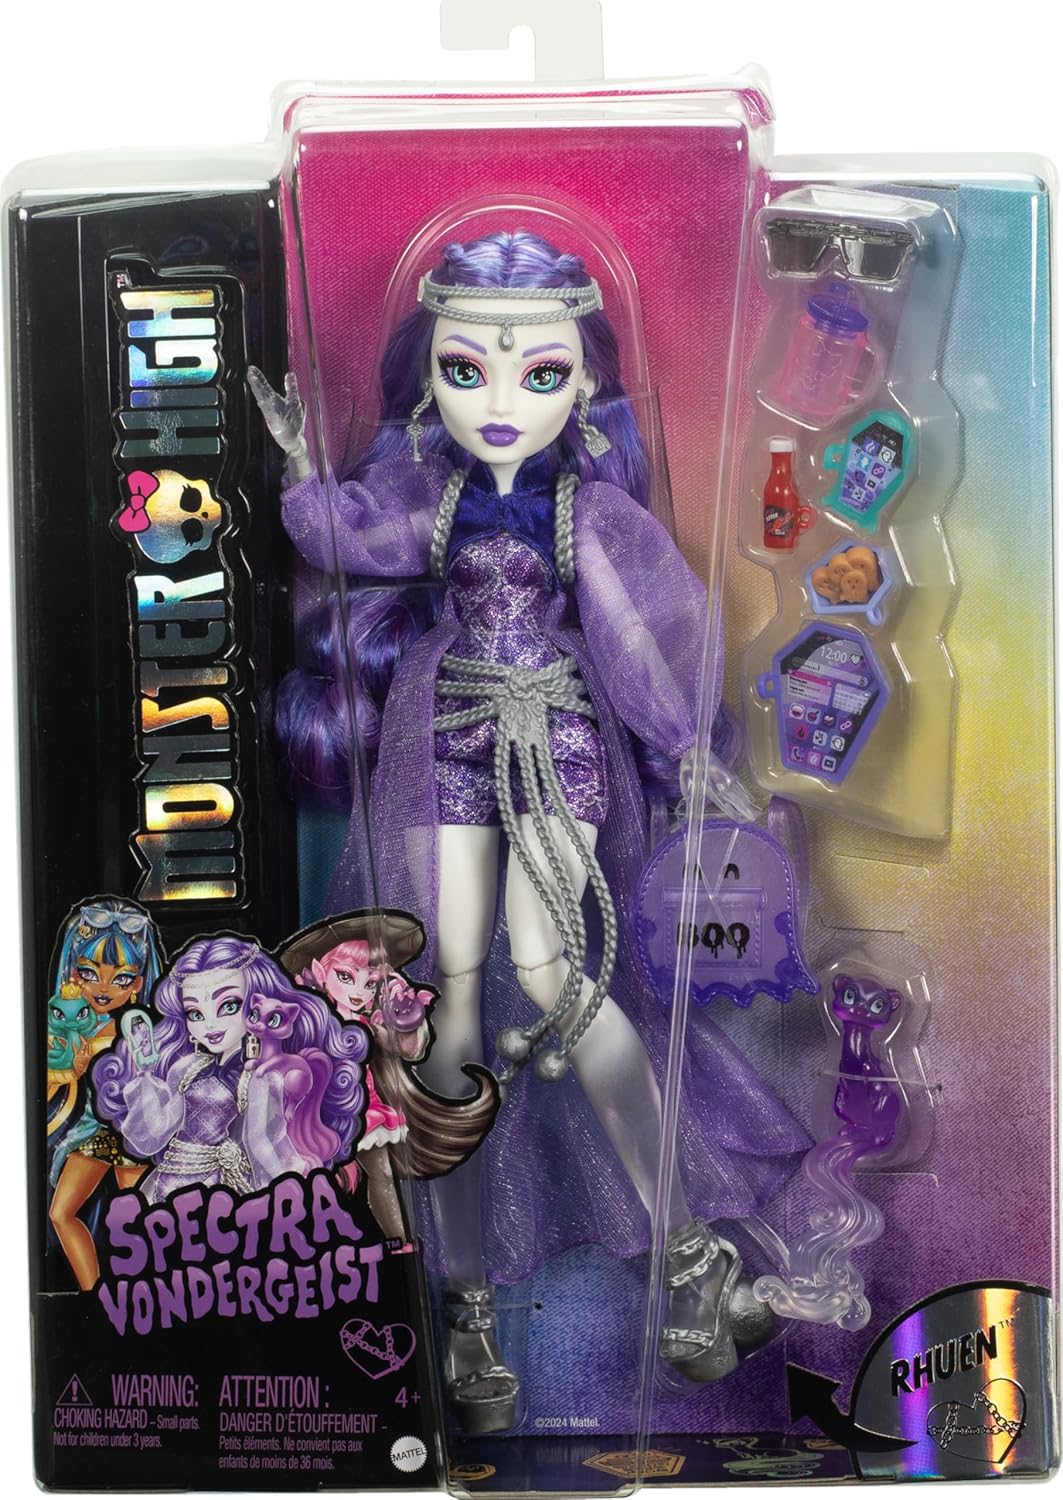 Monster High Spectra Vondergeist Doll with Pet Ferret Rhuen and Accessories like Backpack_ Tablet_